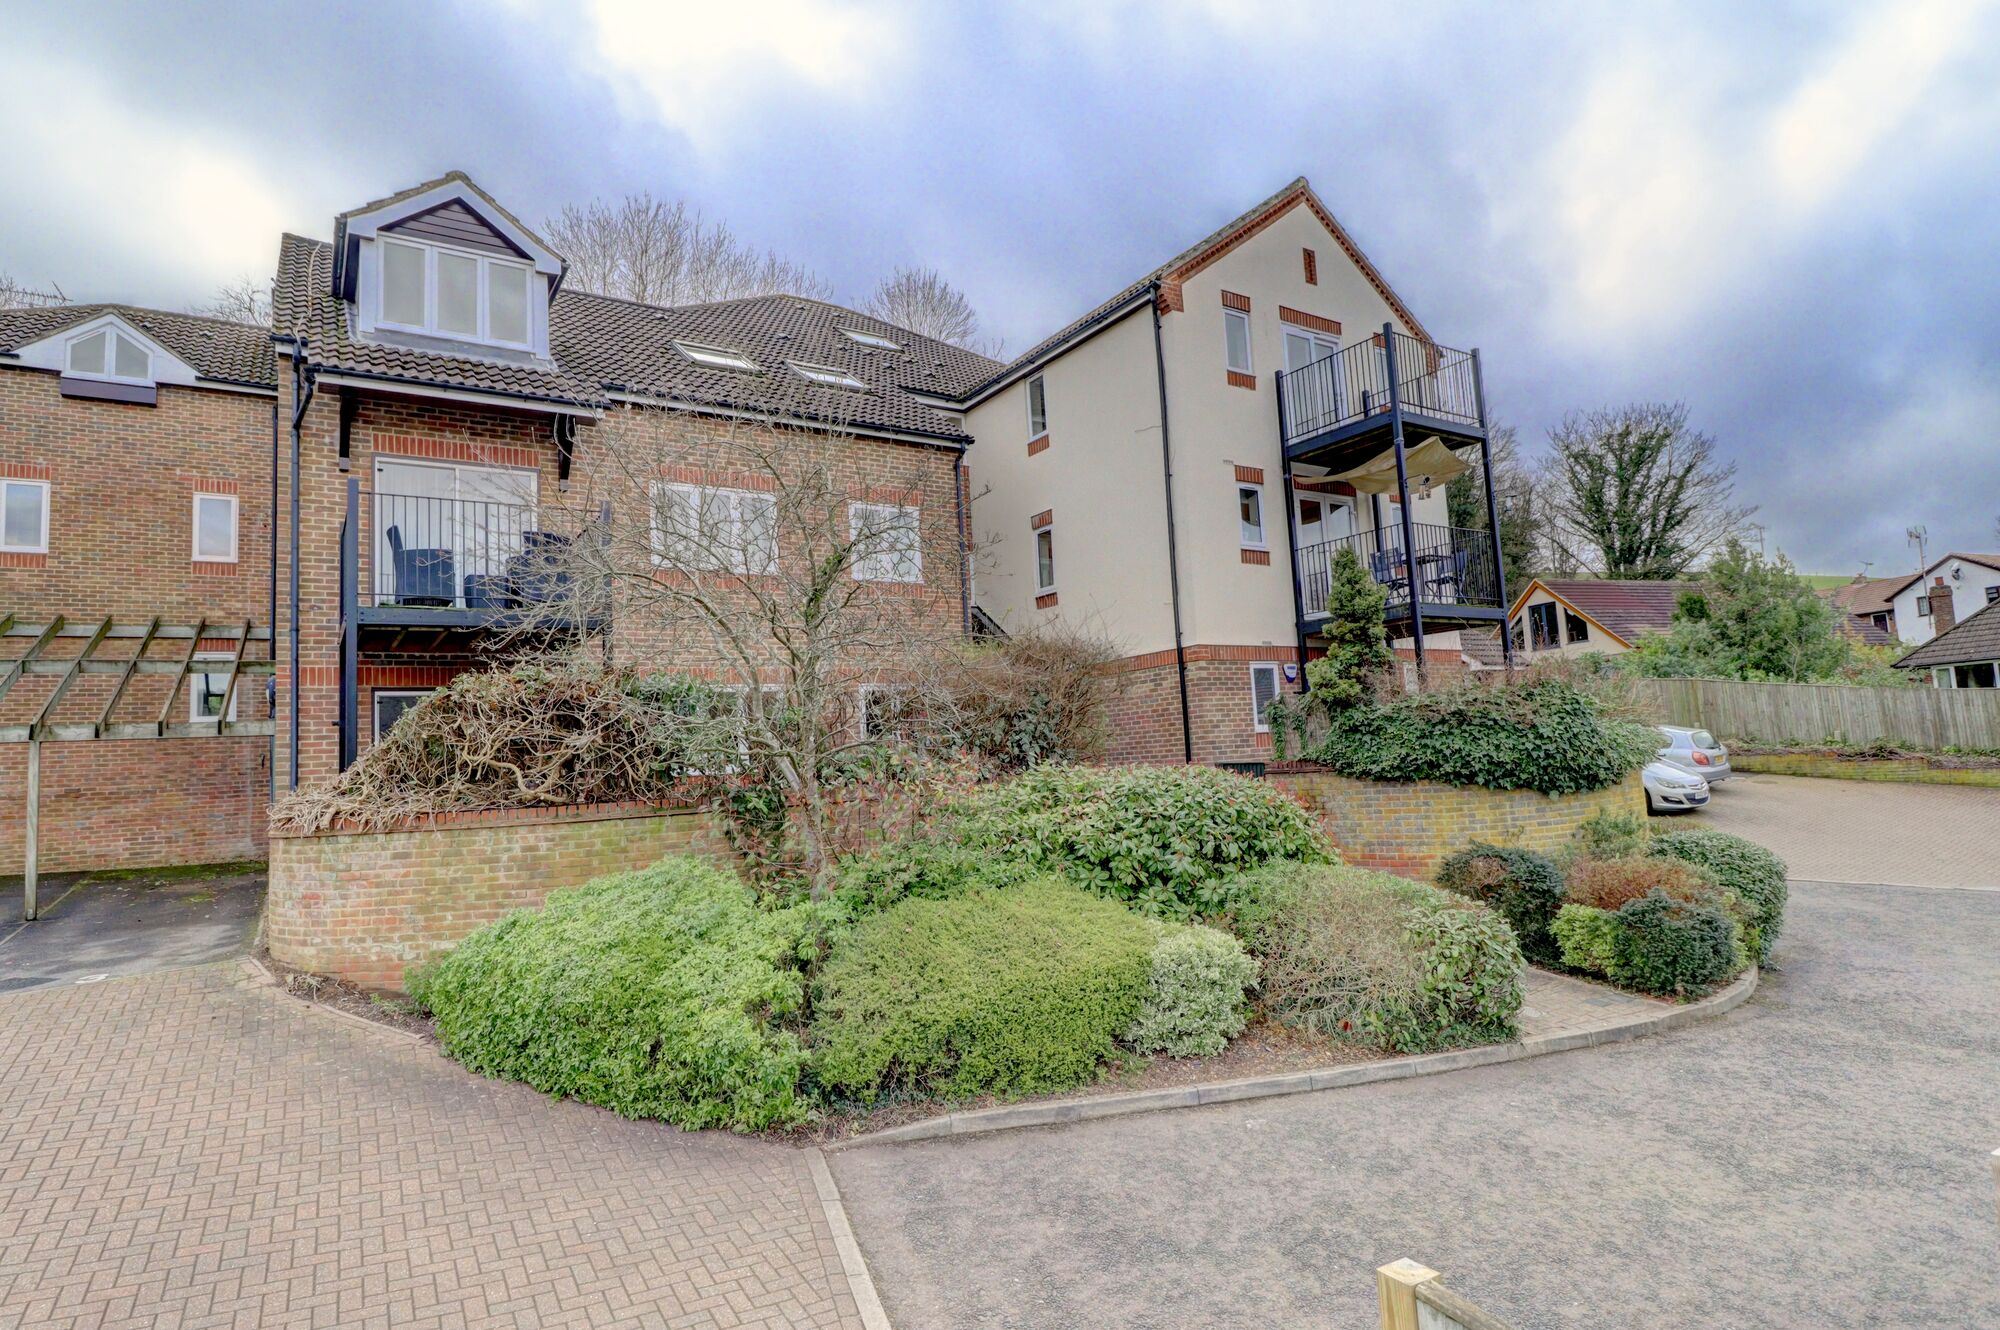 2 bedroom  flat to rent, Available now Holly Place, High Wycombe, HP11, main image